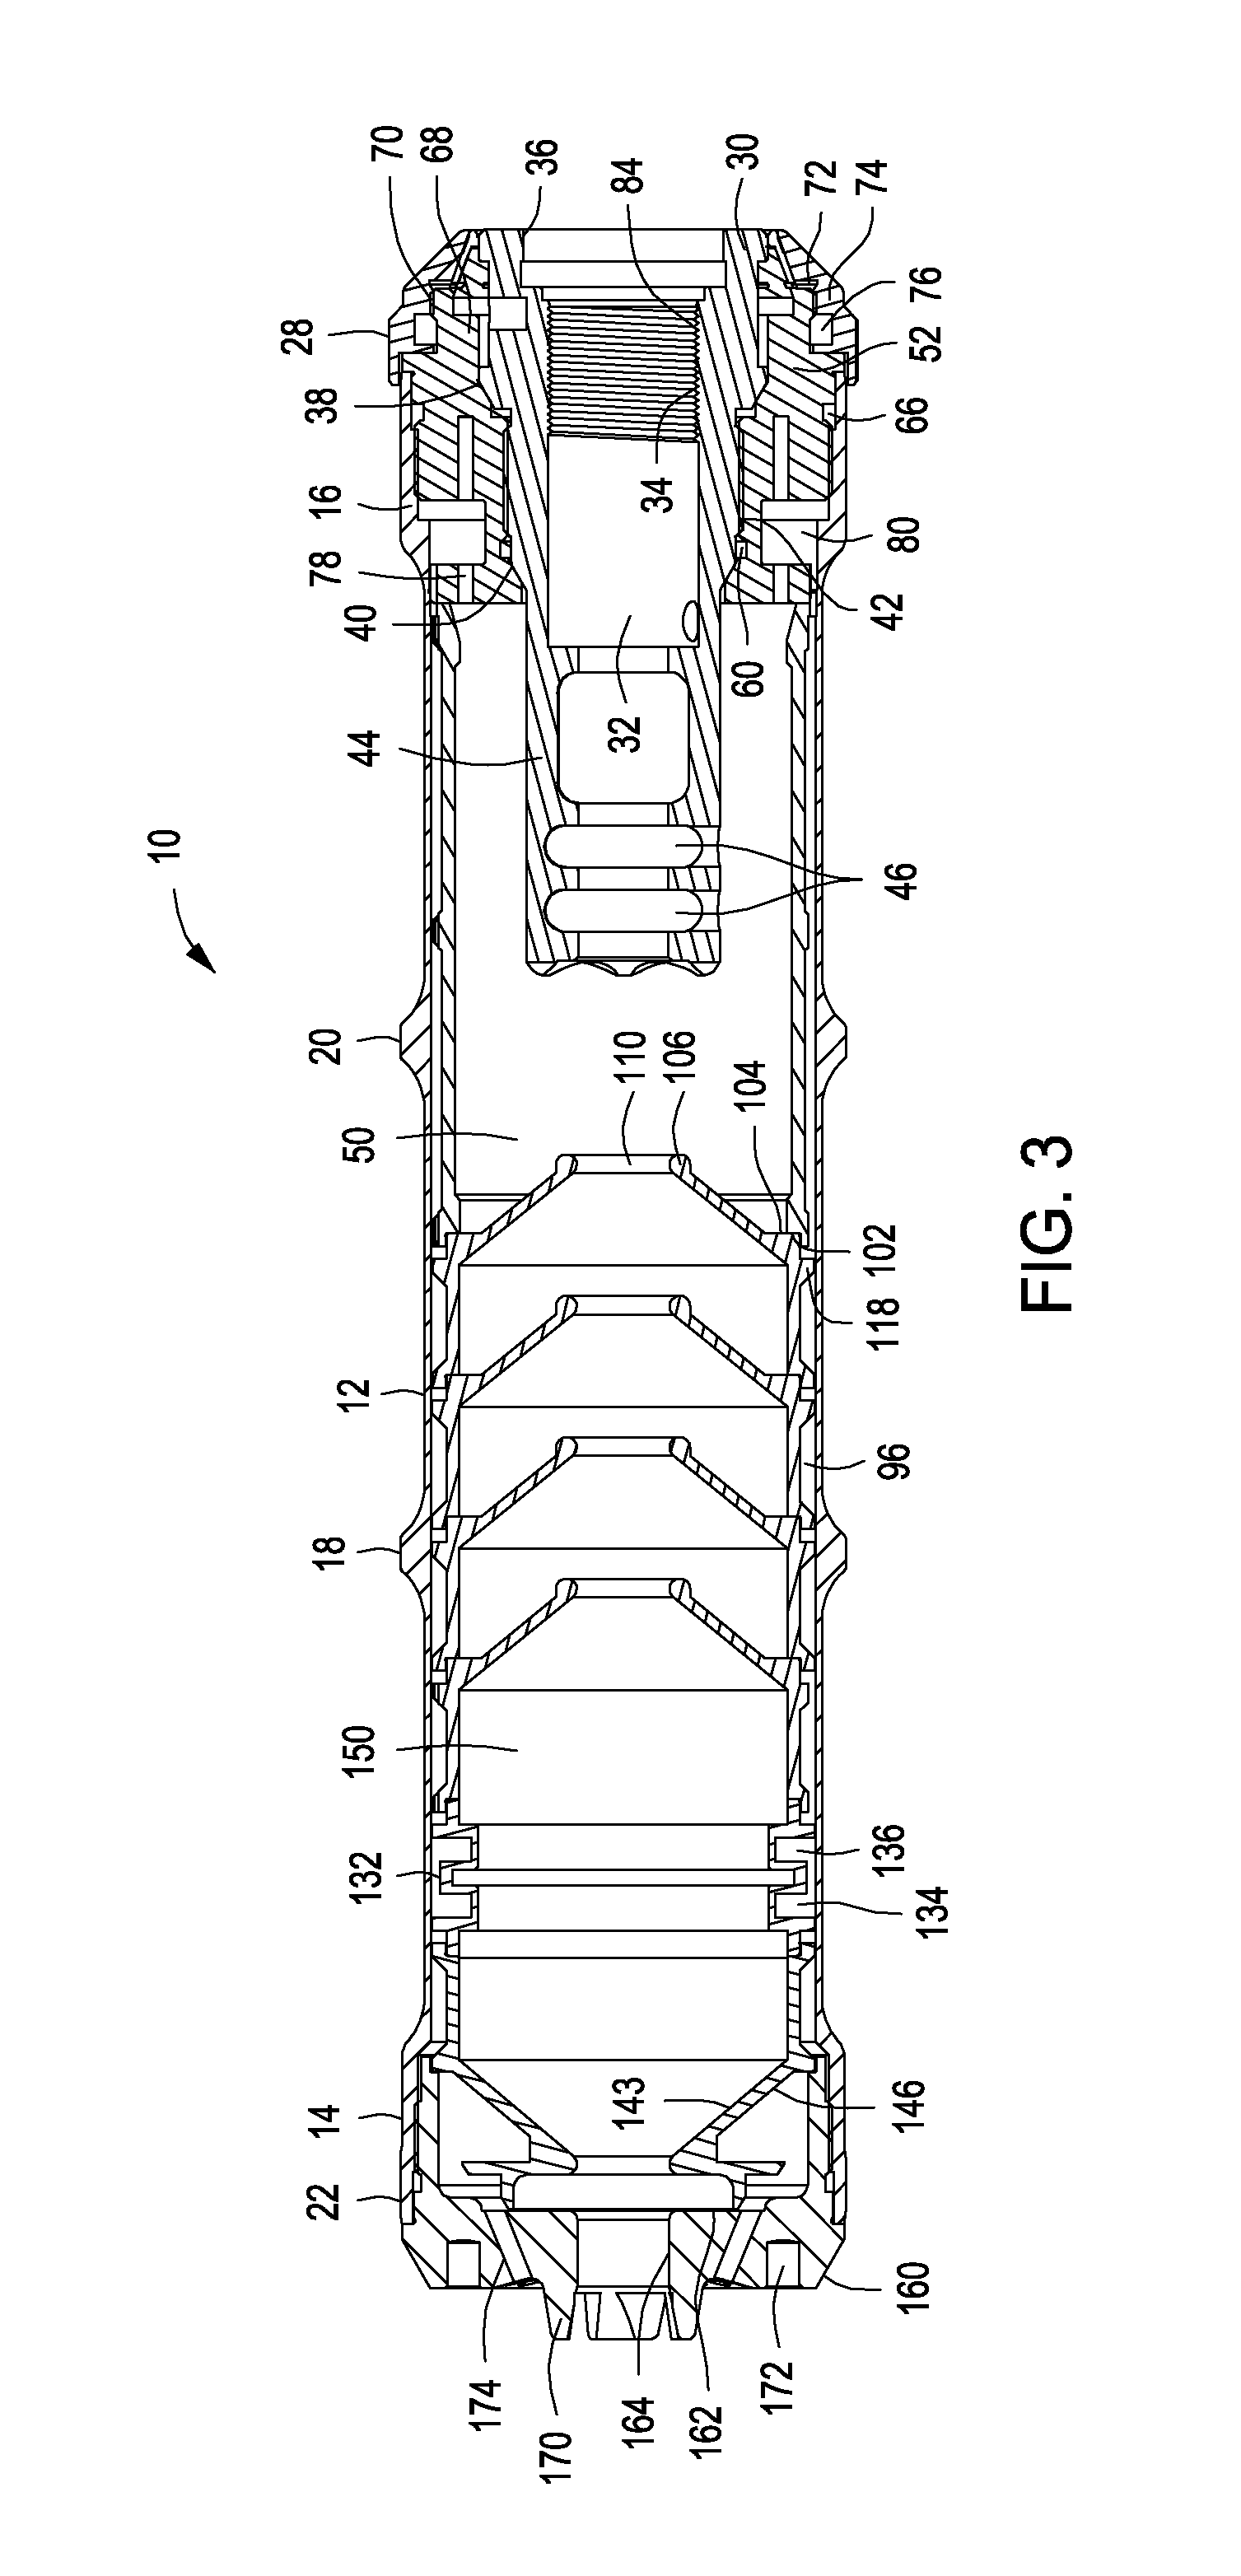 Suppressor and flash hider device for firearms having dual path gas exhaust